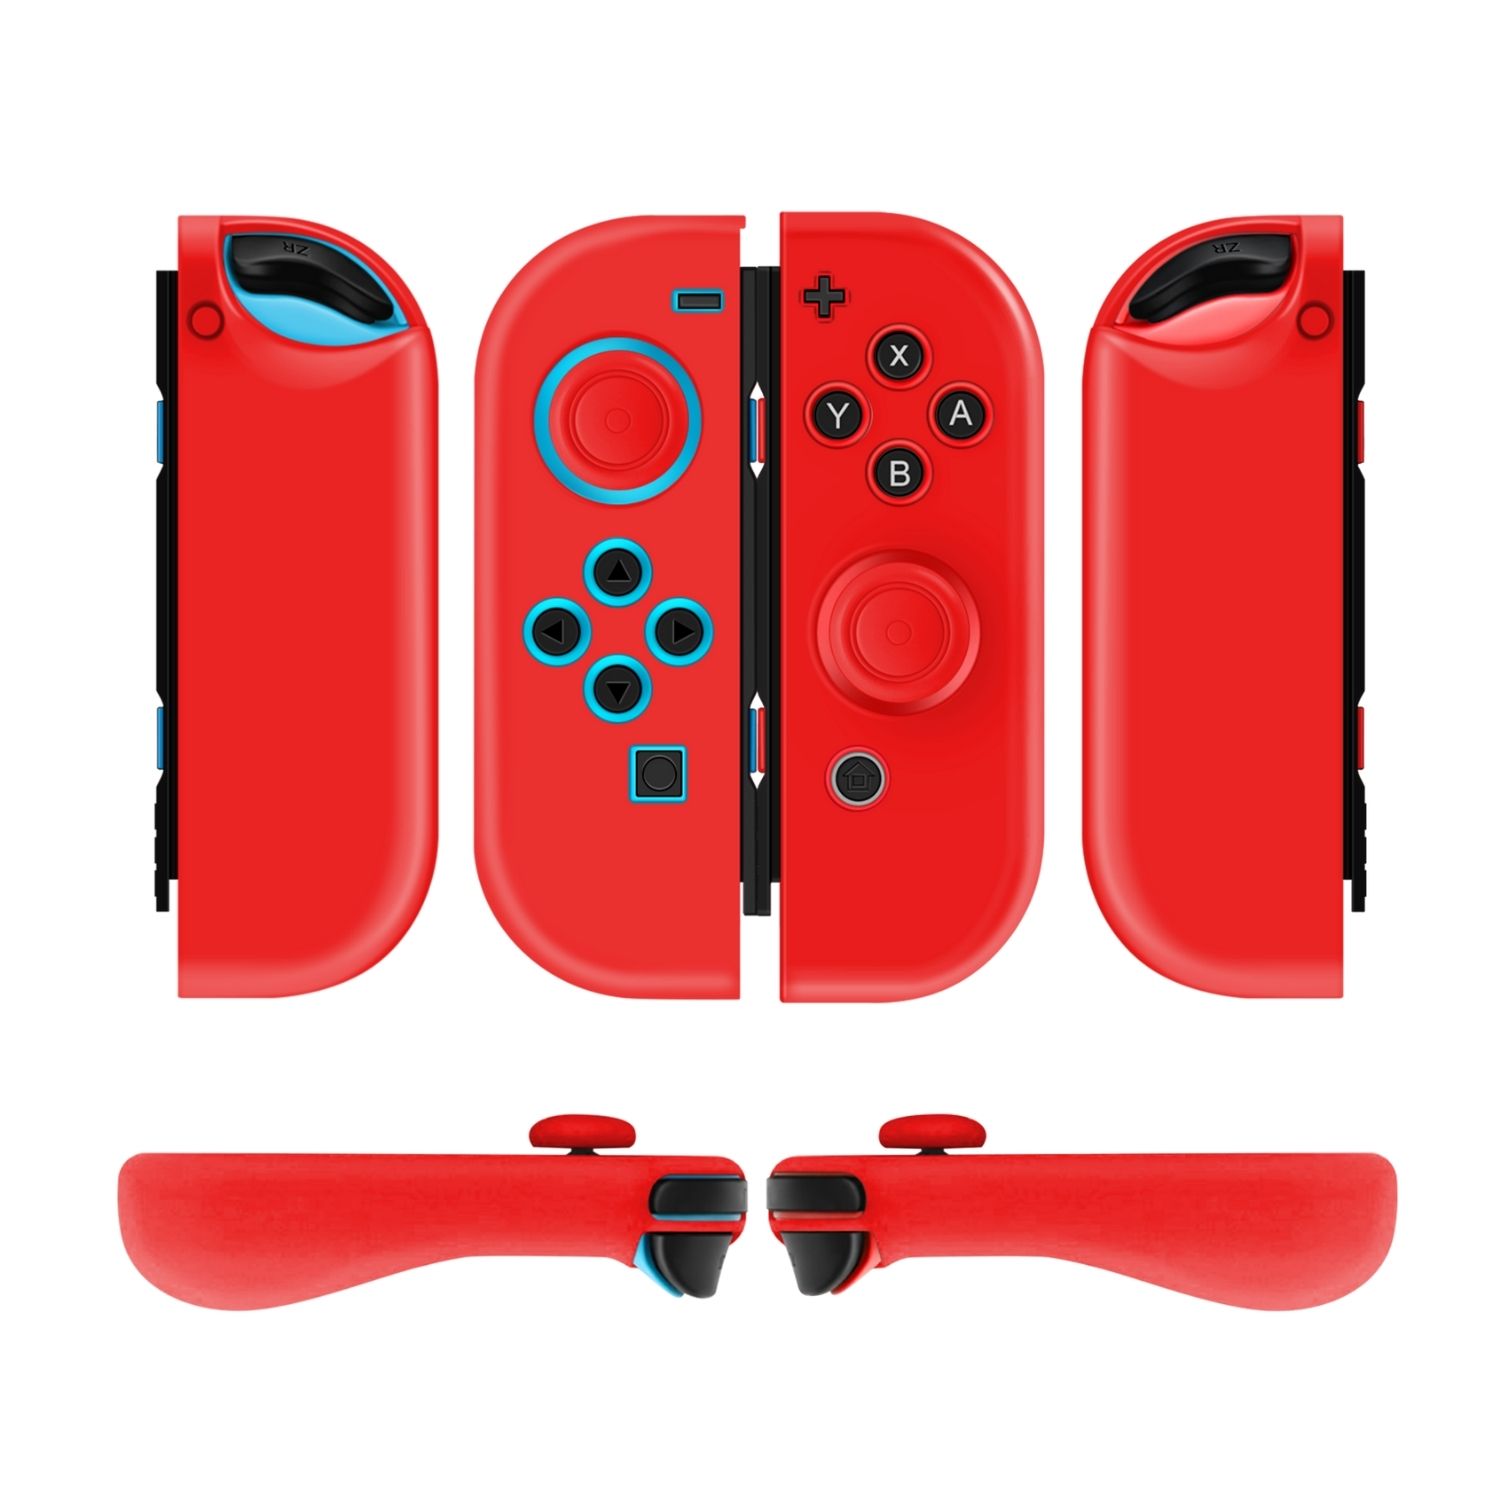 Nintendo Switch Joy-Con Grip Gel Guards with Thumb Grips Caps - Protective Case Covers Anti-Slip Ergonomic Lightweight Design Joy Con Comfort Grip Controller Skin Accessories (1 Pair Neon Red)